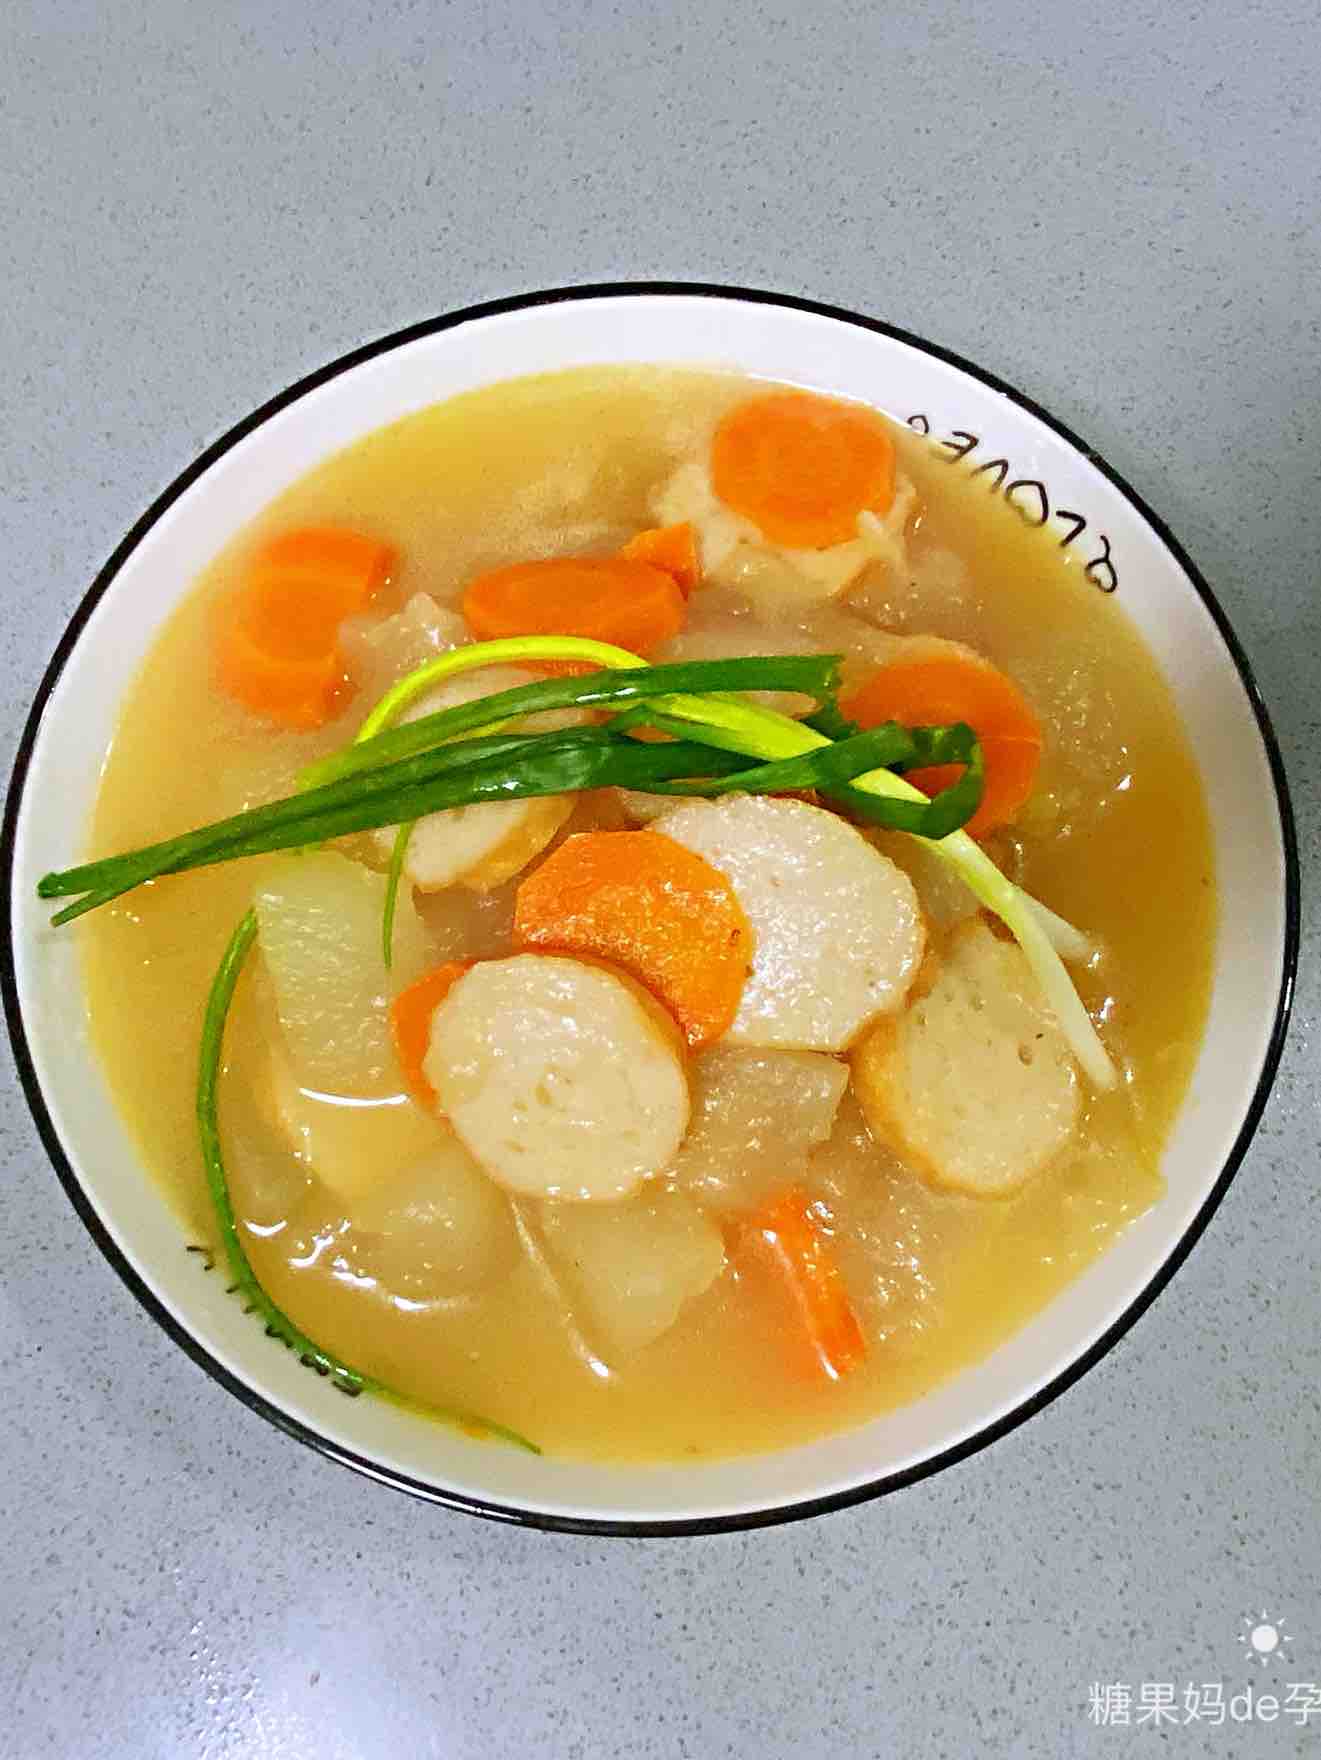 [recipe for Pregnant Women] Fish Cake and Winter Melon Soup, Sweet and Delicious, Umami